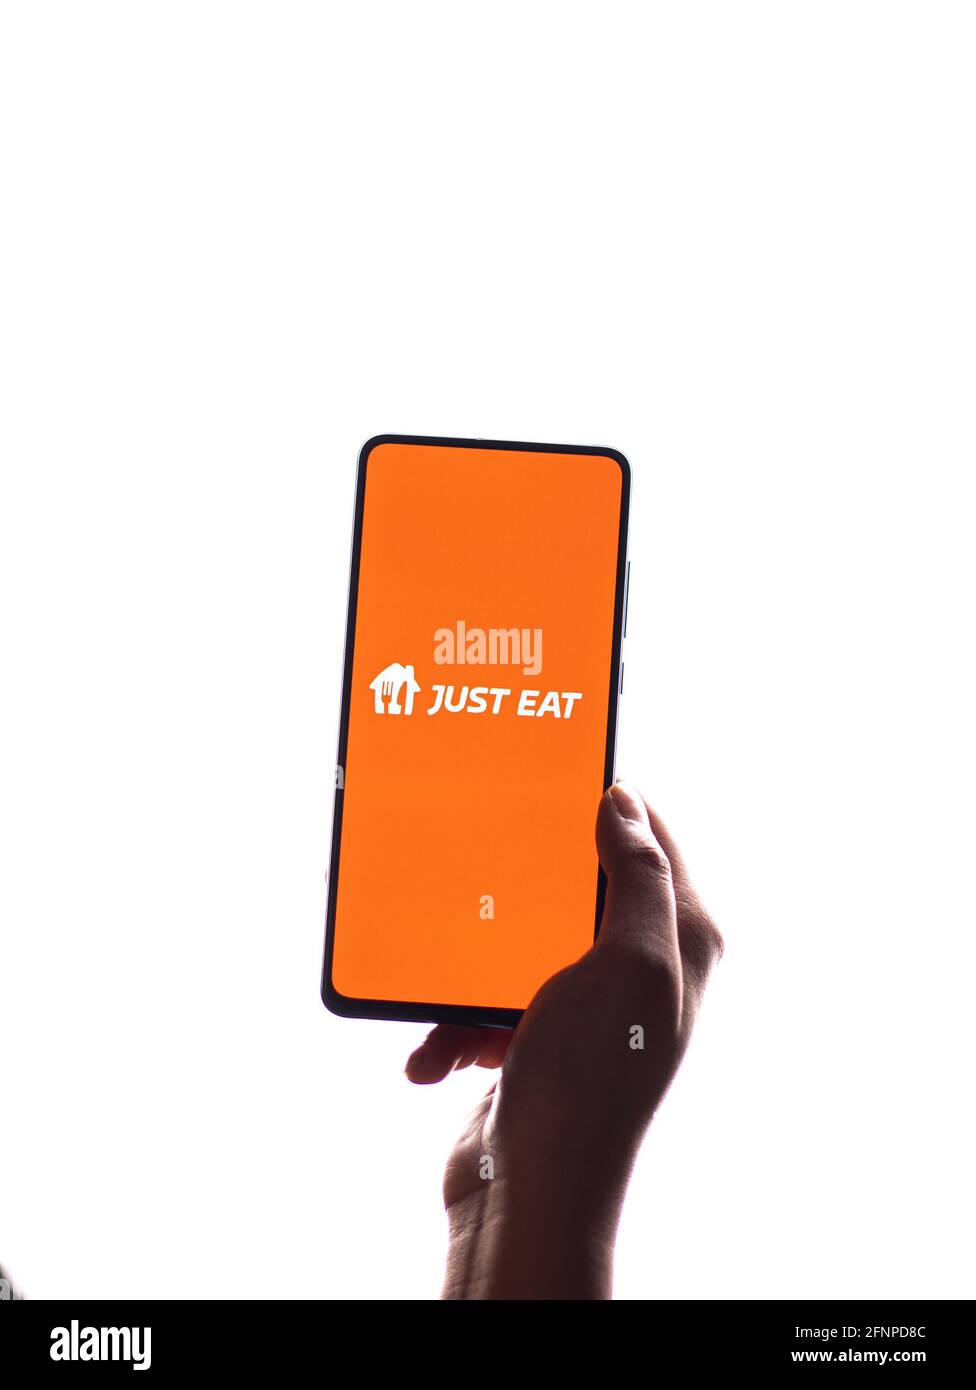 Assam, india - 18 maggio 2021 : Just eat logo on phone screen stock image. Foto Stock